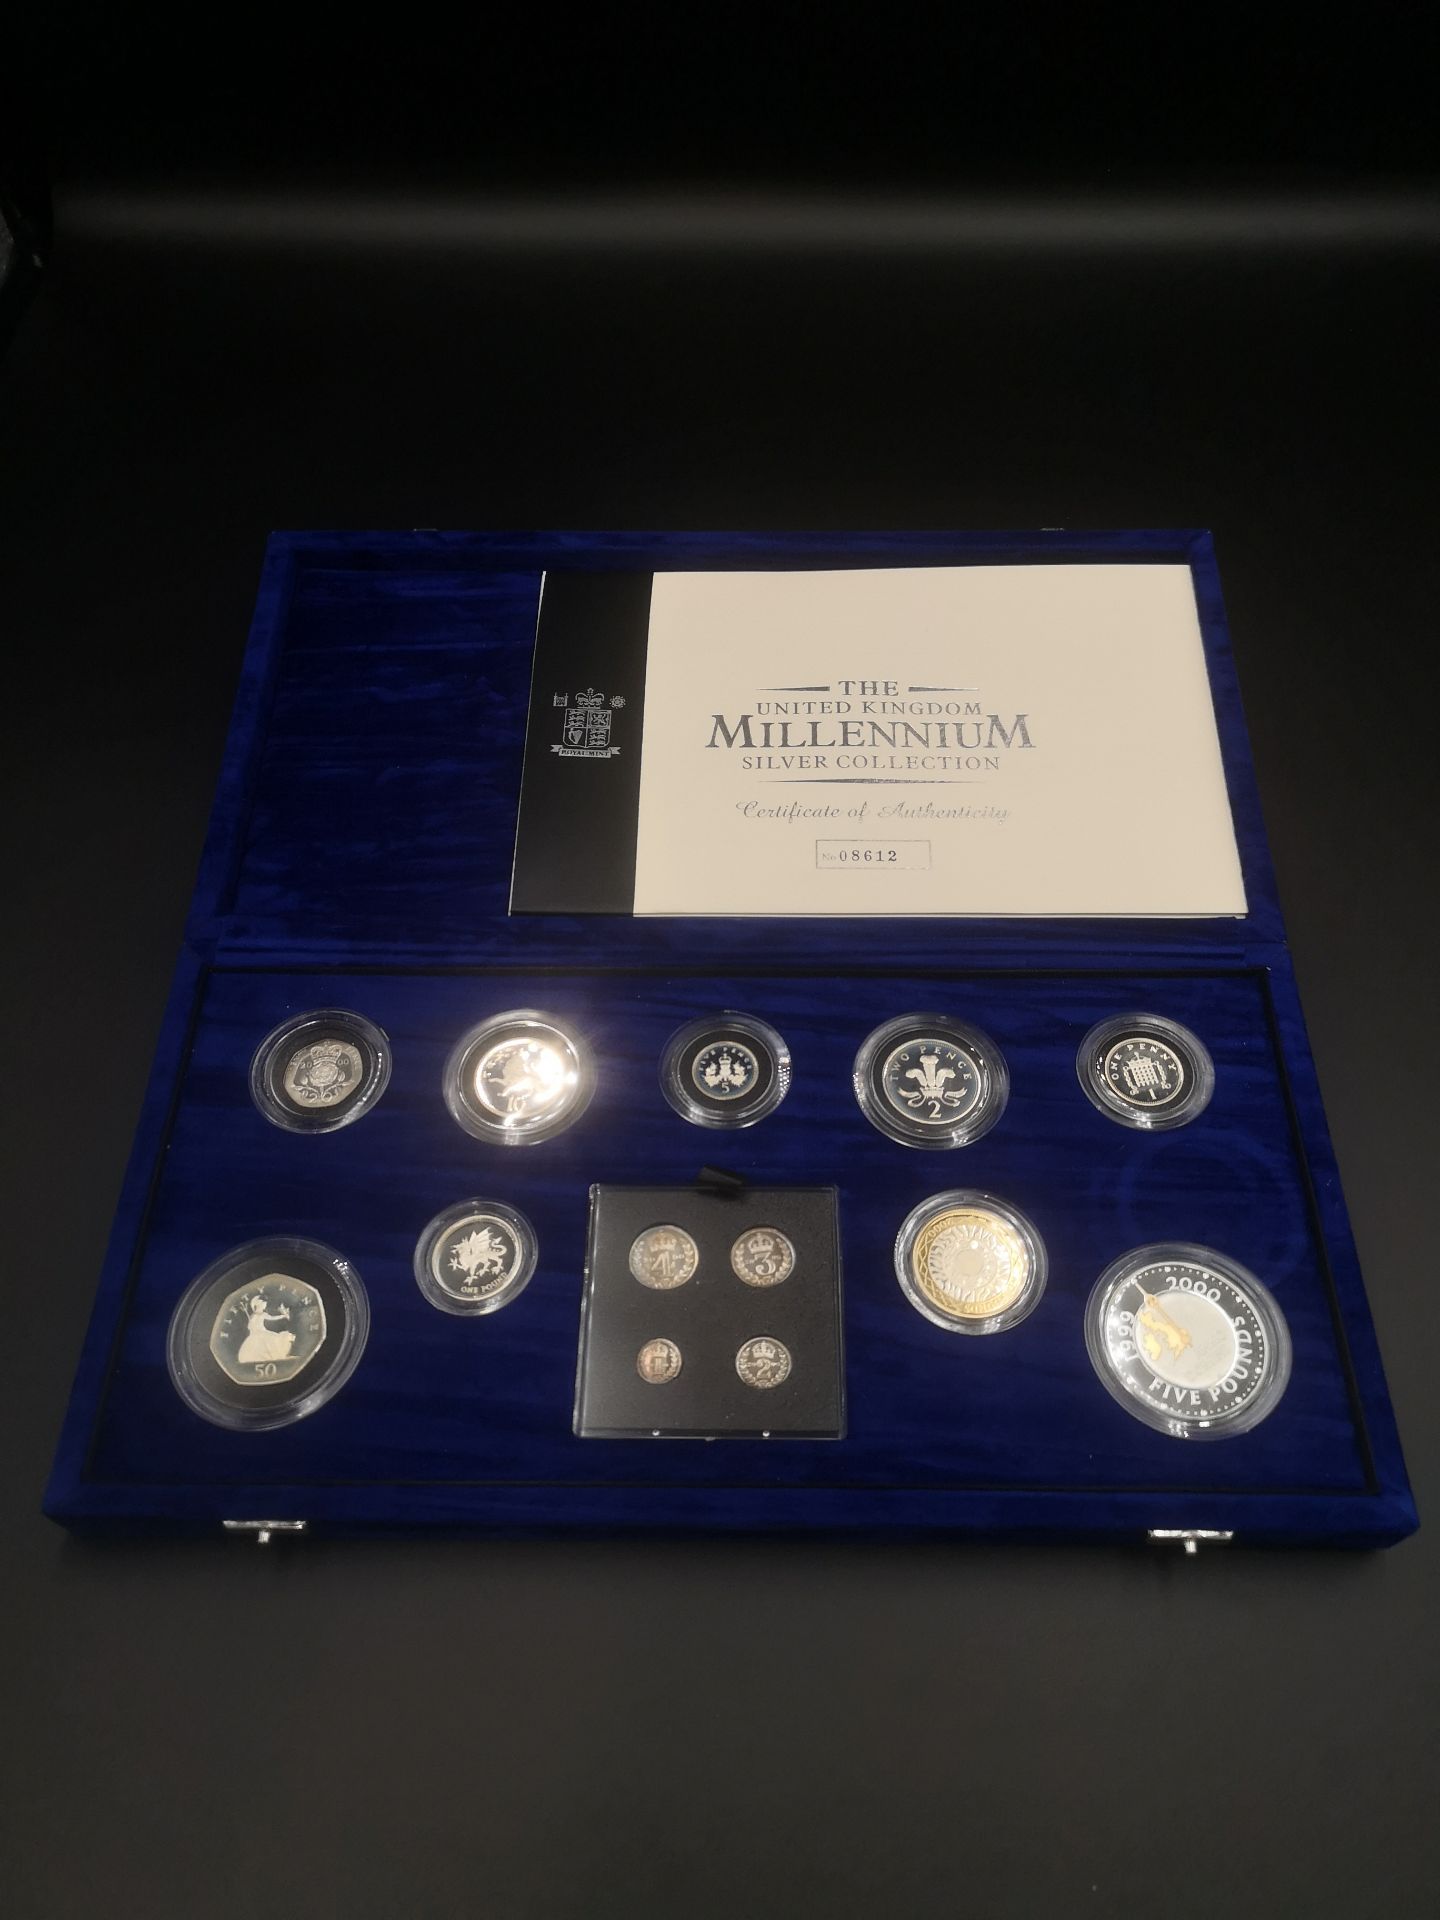 Royal Mint UK Millenium silver coin collection - Image 2 of 6